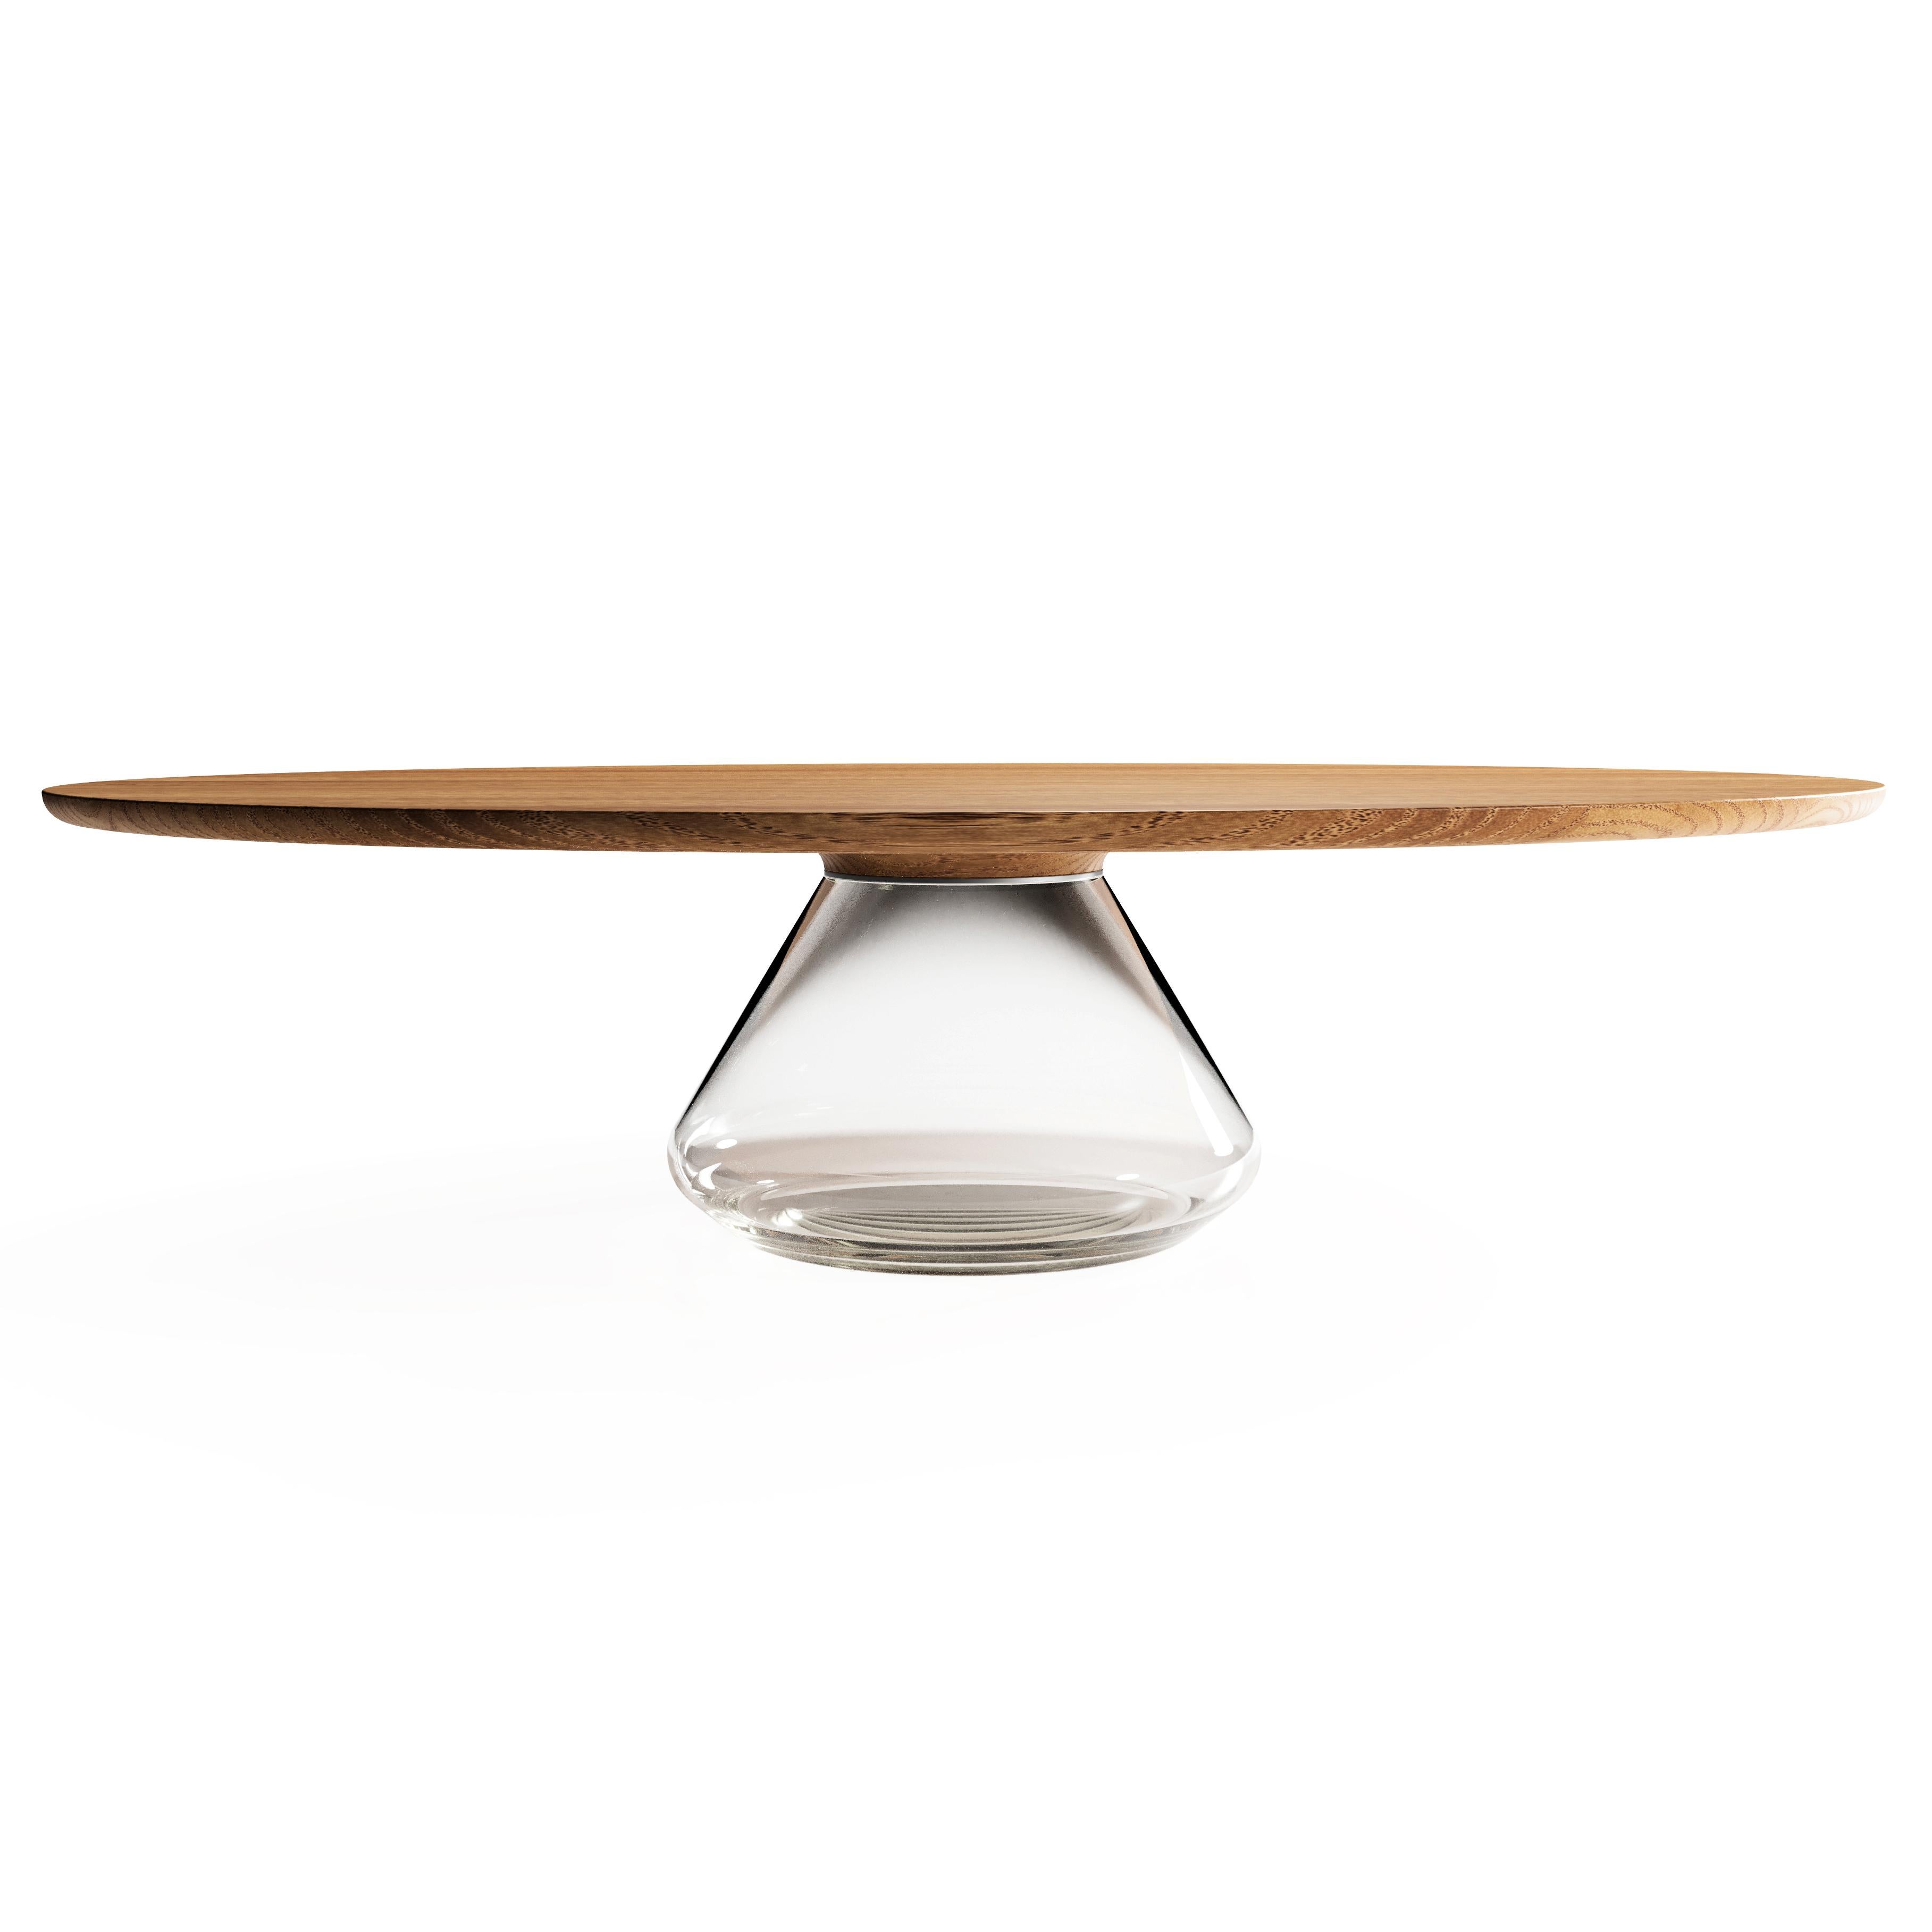 The Eclipse I, limited edition coffee table by Grzegorz Majka
Limited Edition of 8
Dimensions: 54 x 48 x 14 in
Materials: Glass, oak

The total eclipse of every interior? With this amazing table everything is possible as with its Minimalist style it